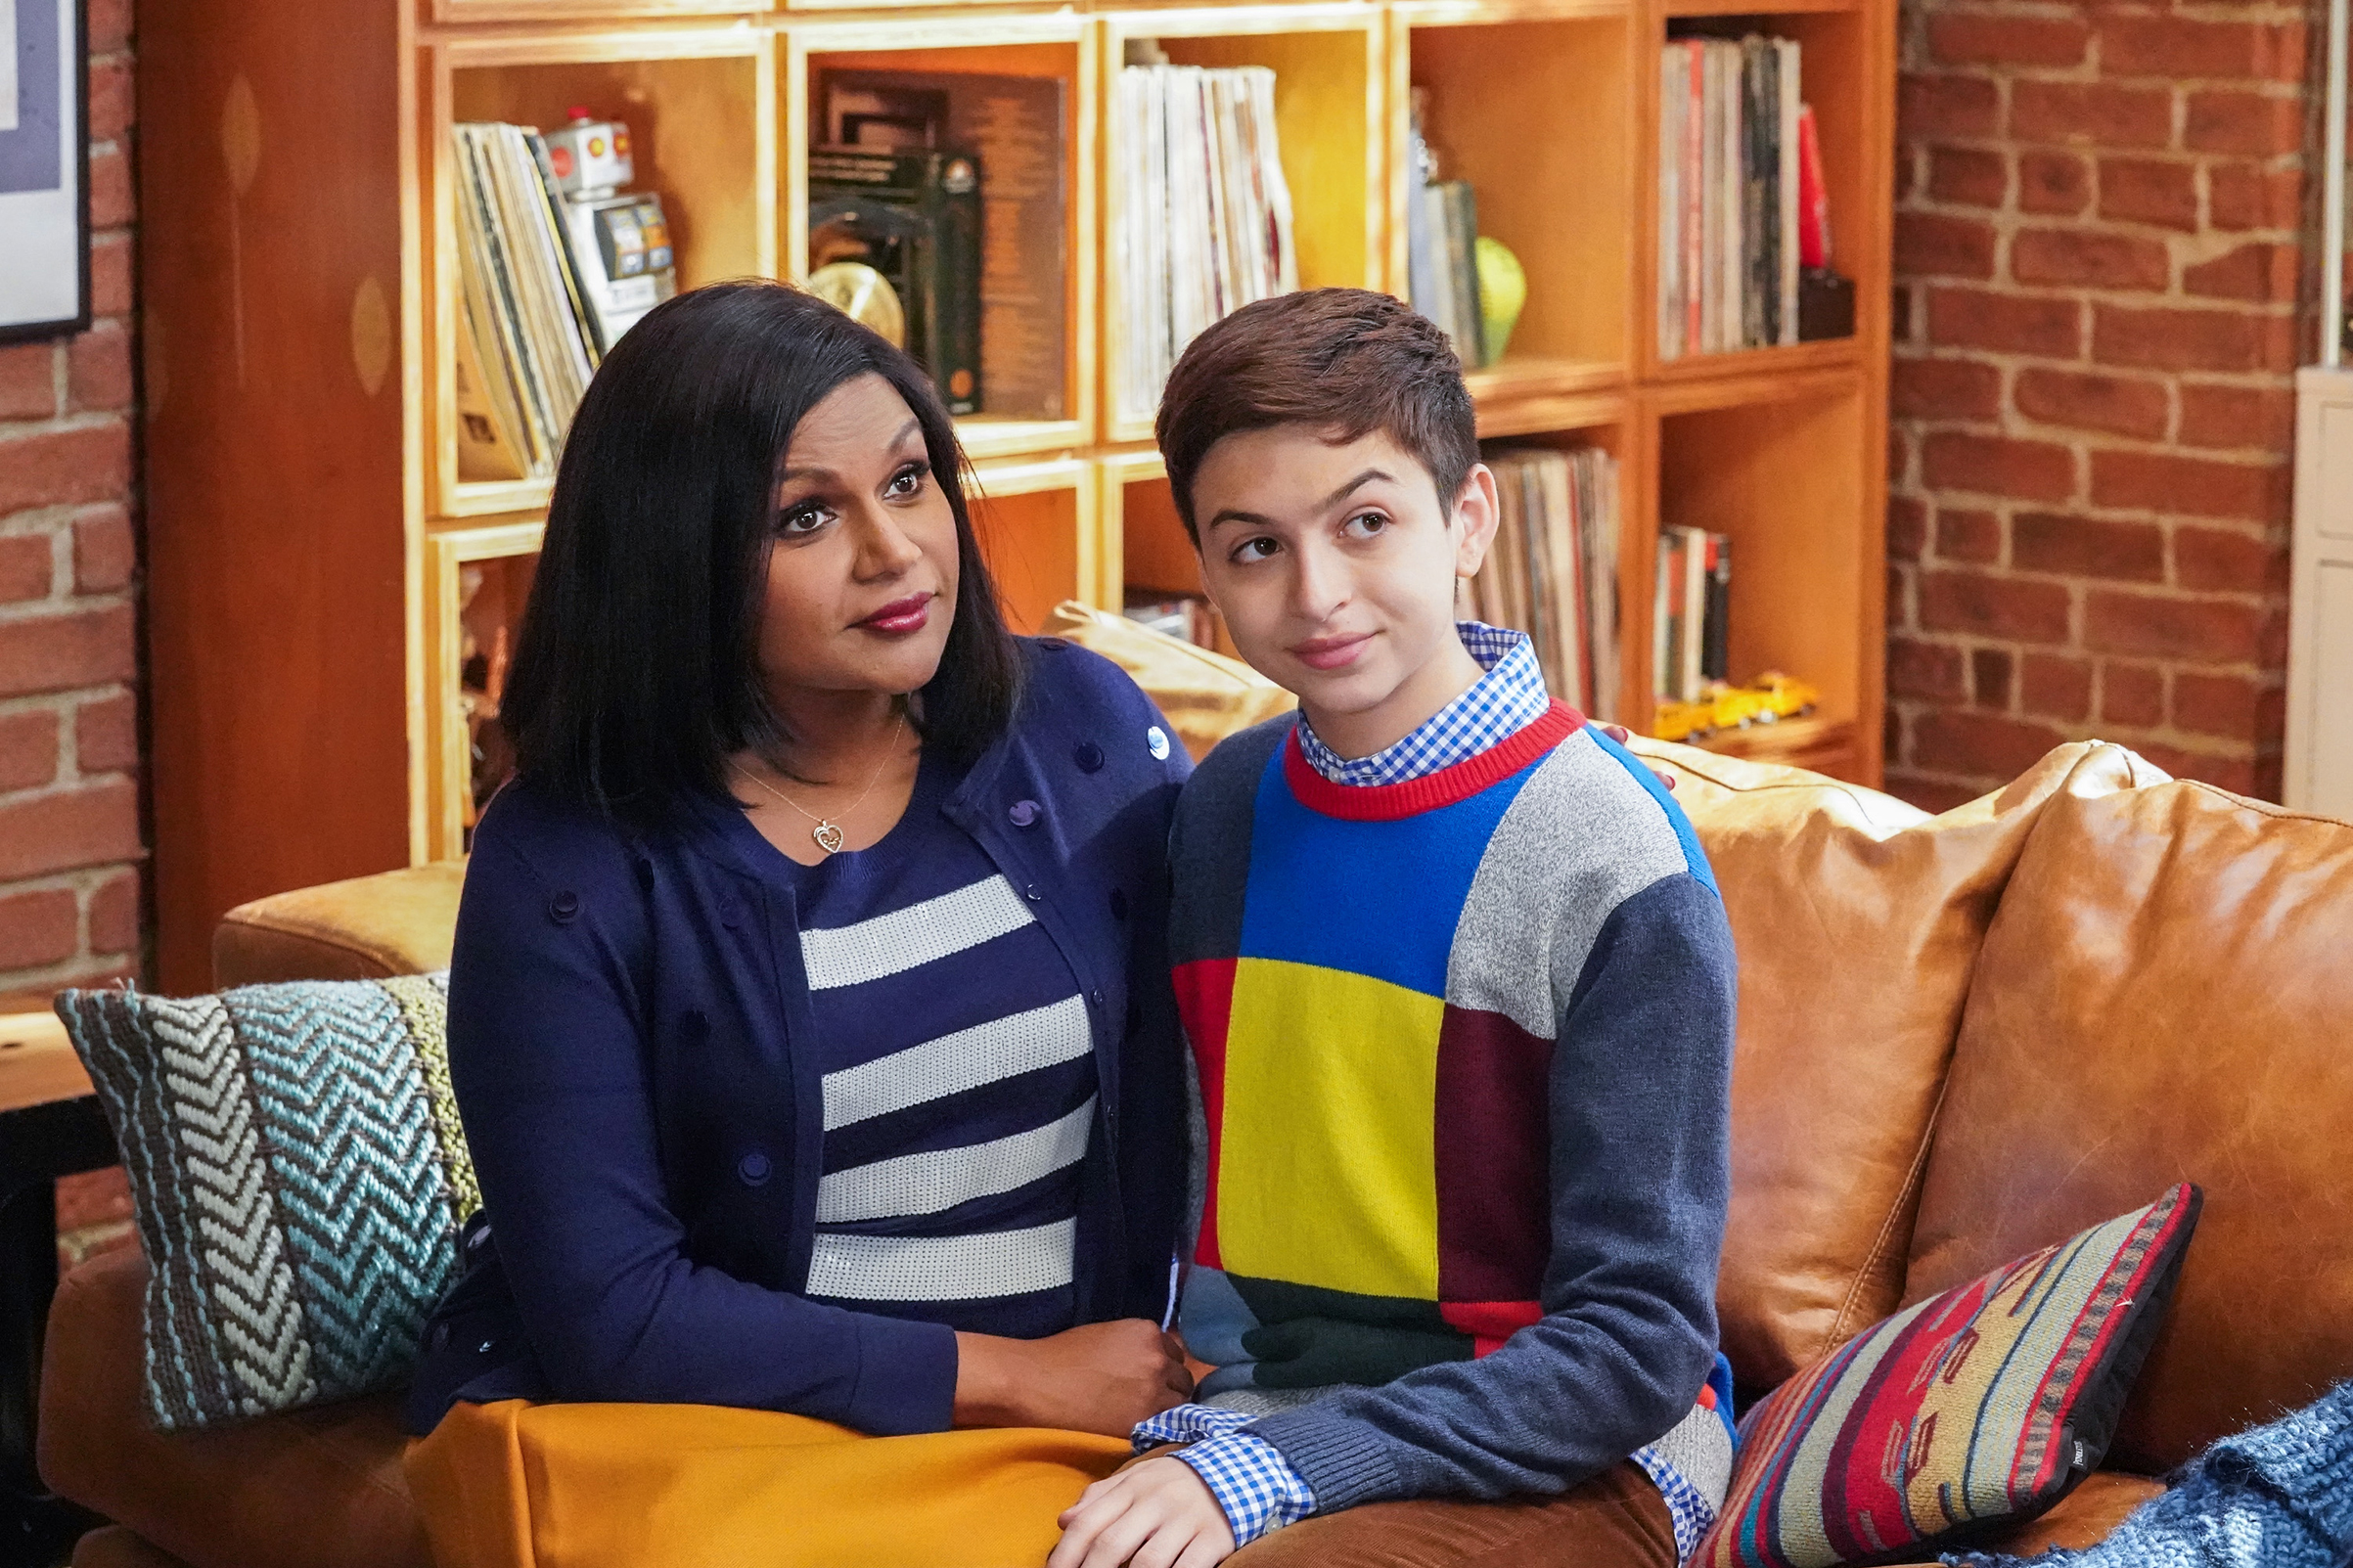 Totah starred in the Mindy Kaling-produced comedy Champions. (She asked that a production photo from her professional work be used to accompany this essay, rather than a personal photo that puts emphasis on her current appearance.) (NBCUniversal)